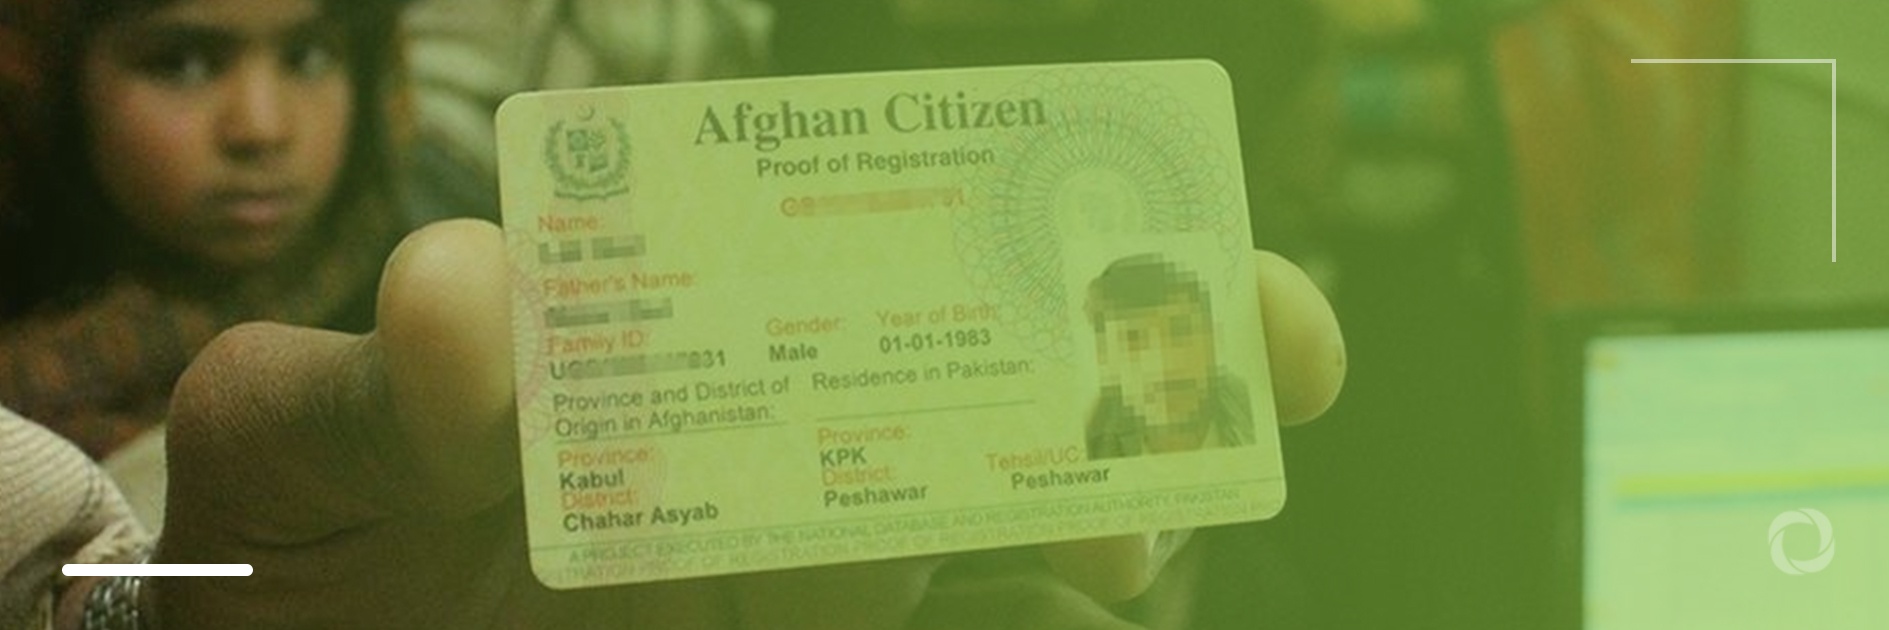 Pakistan to issue smart identity cards to Afghan refugees